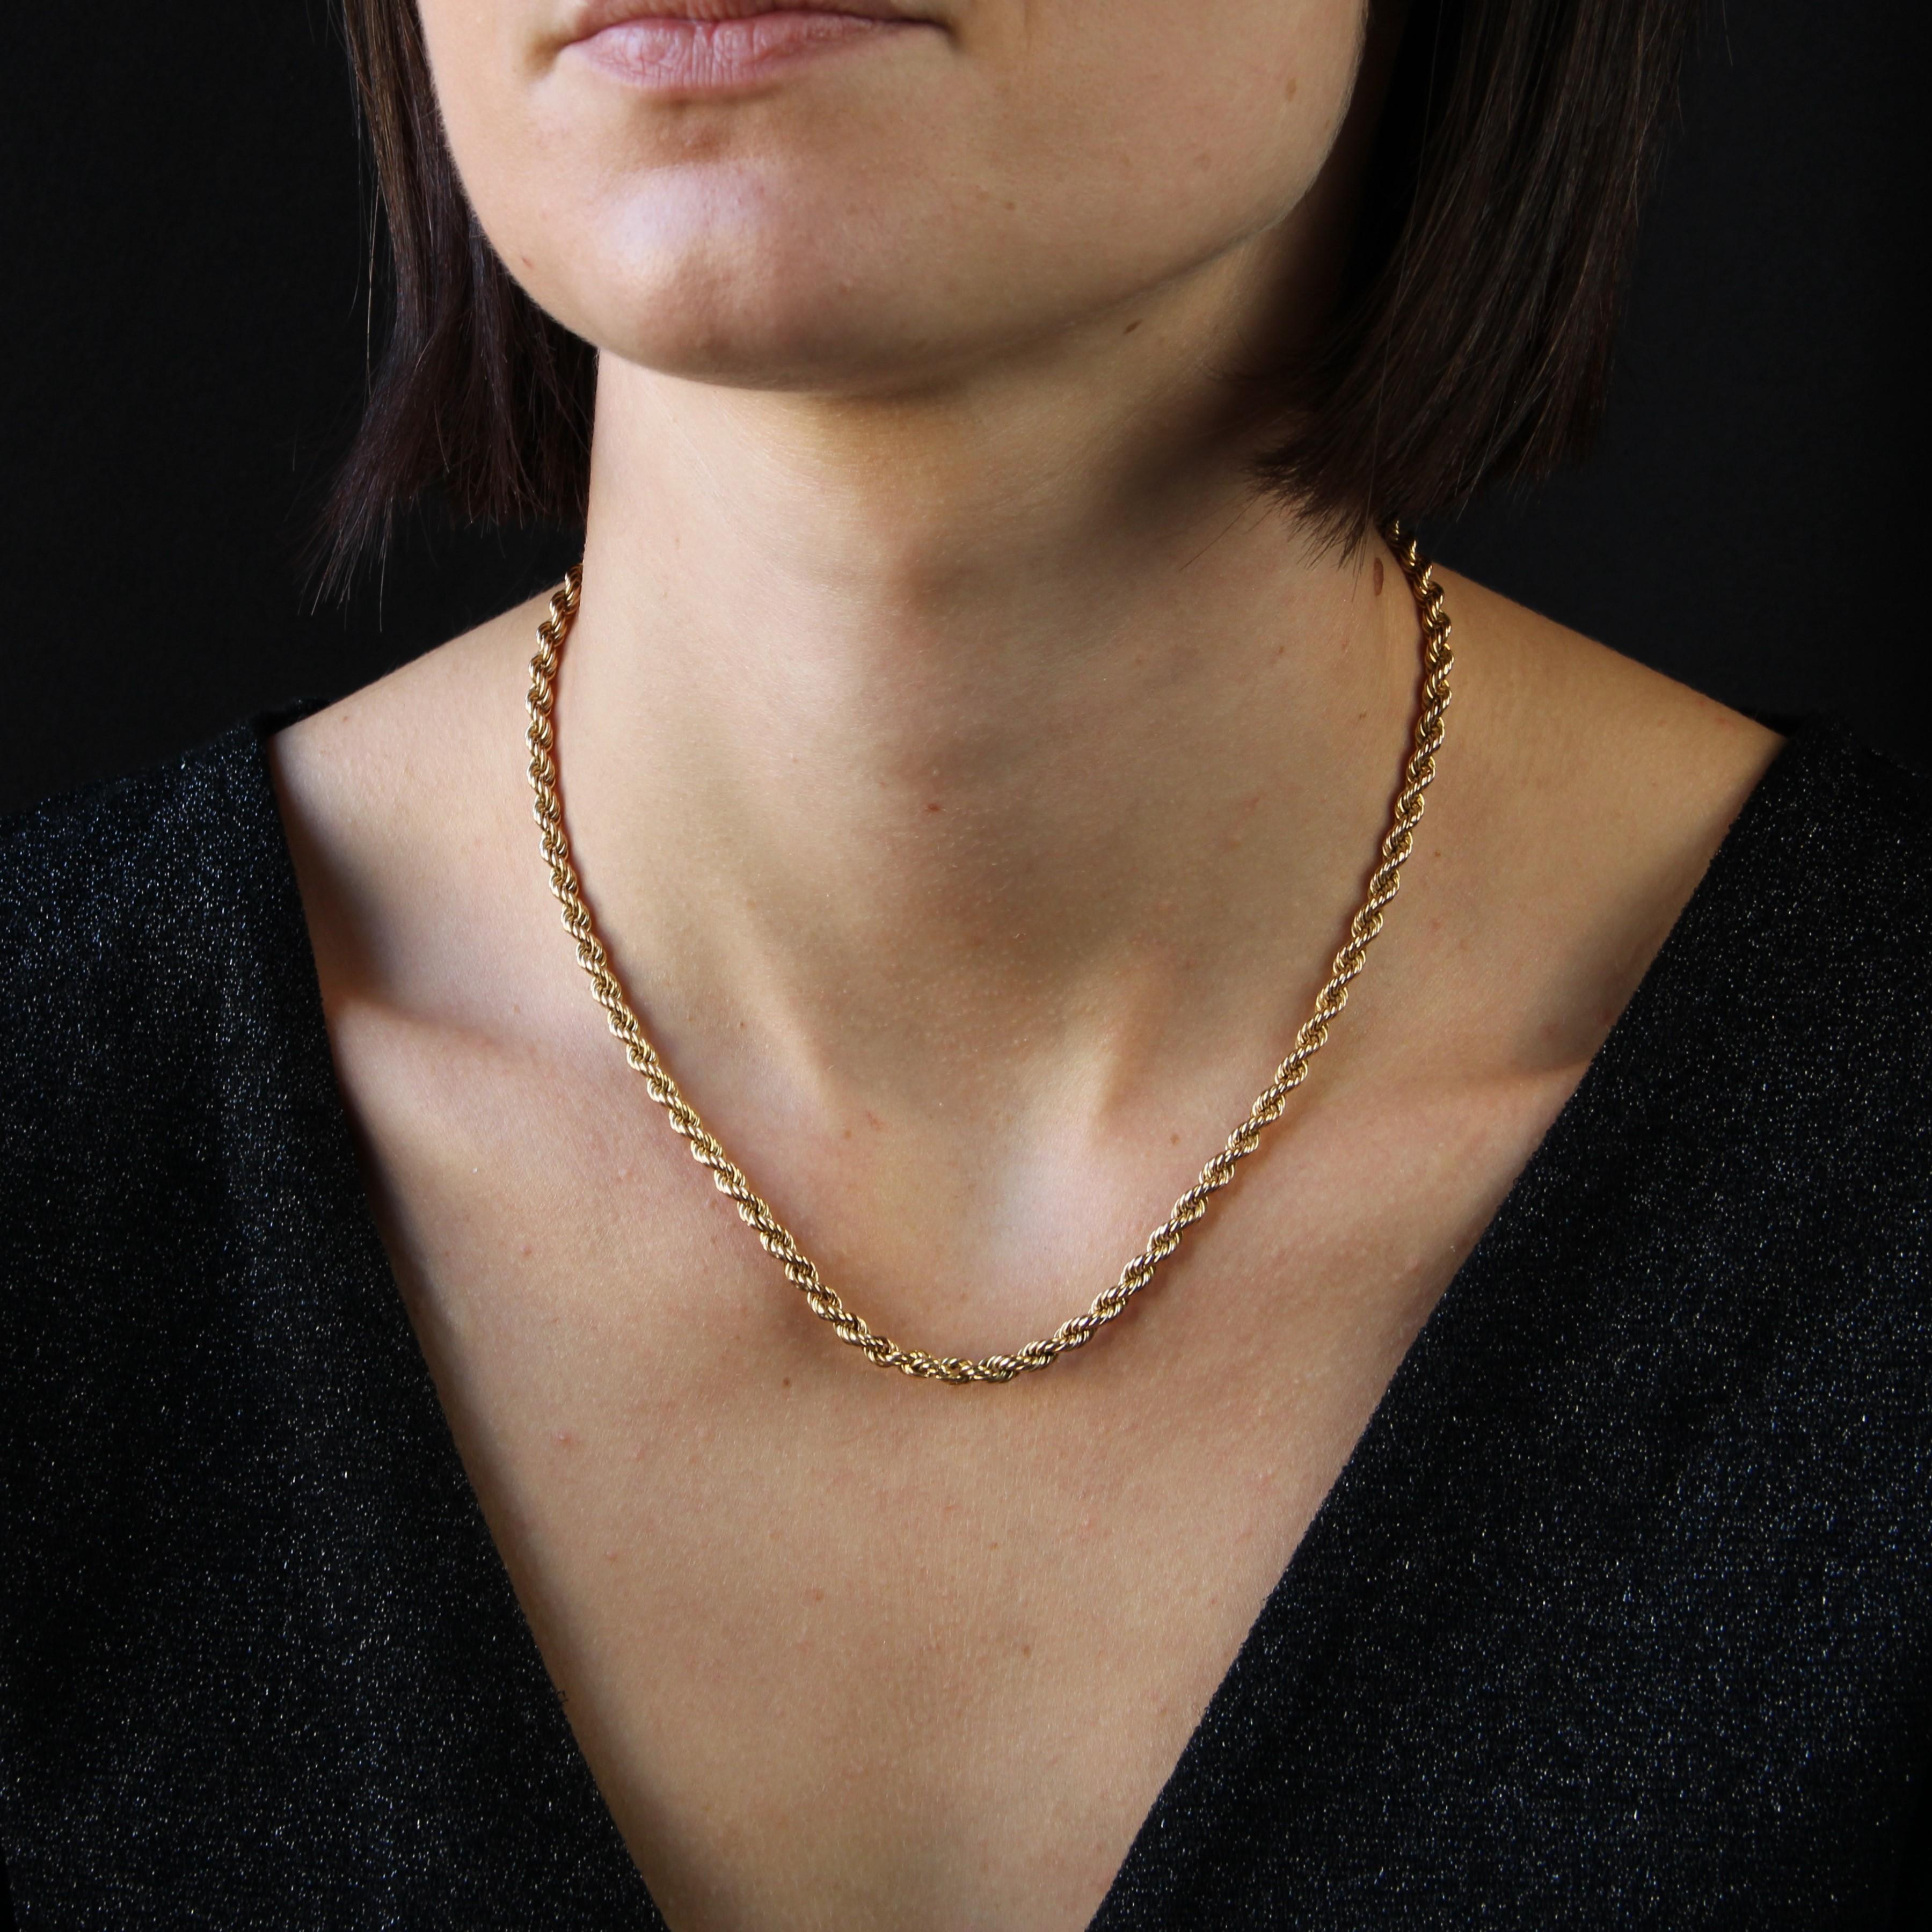 Necklace in 18 karat yellow gold, eagle head hallmark.
This choker necklace is made of twisted gold wire. The clasp is a spring ring.
Length : 43,5 cm approximately, width : 4 mm approximately.
Total weight of the jewel : 10,7 g